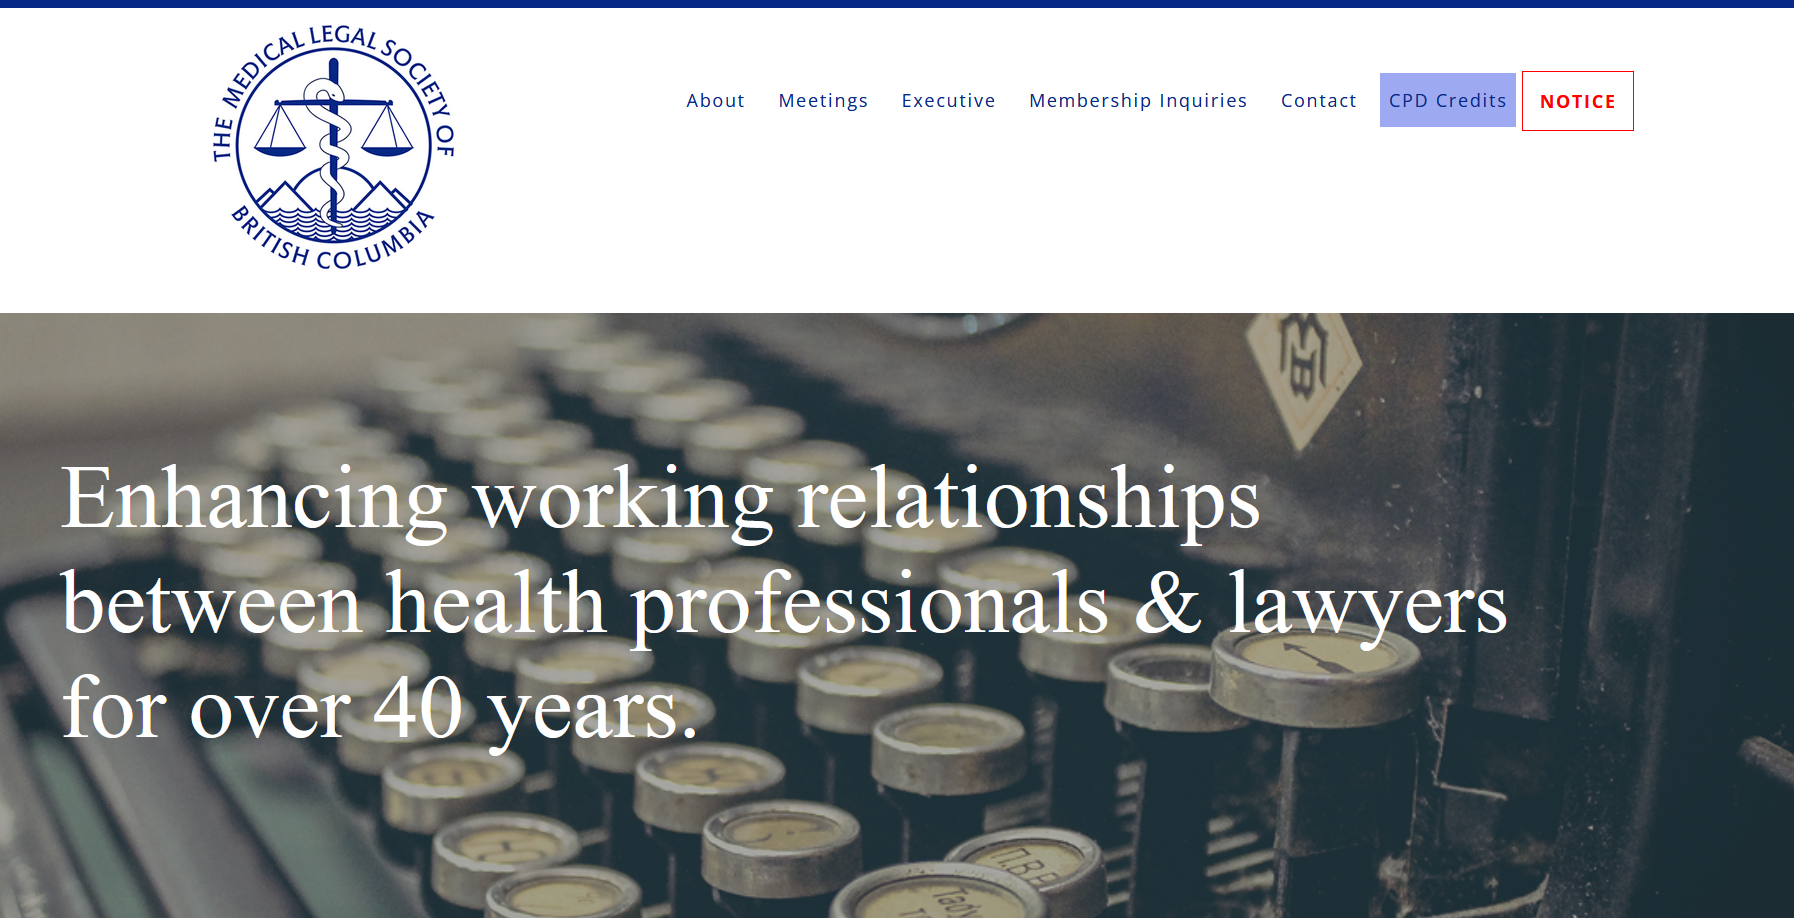 OptoMedia's services for the Medical Legal Society of British Columbia